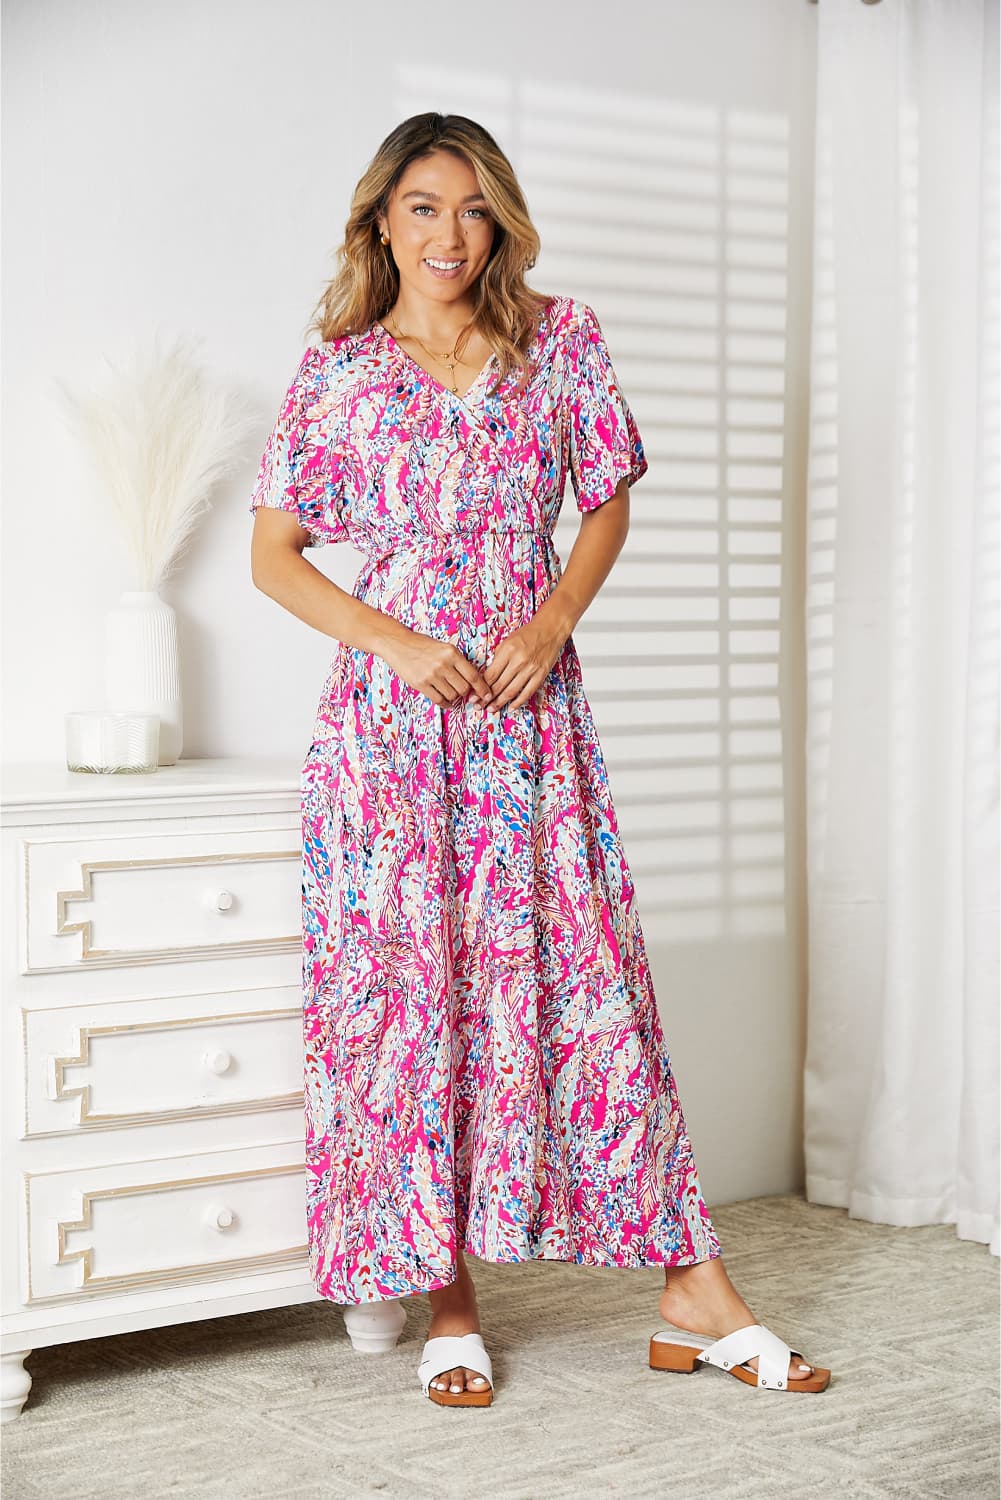 Double Take Hot Pink Multicolored V-Neck Maxi Dress